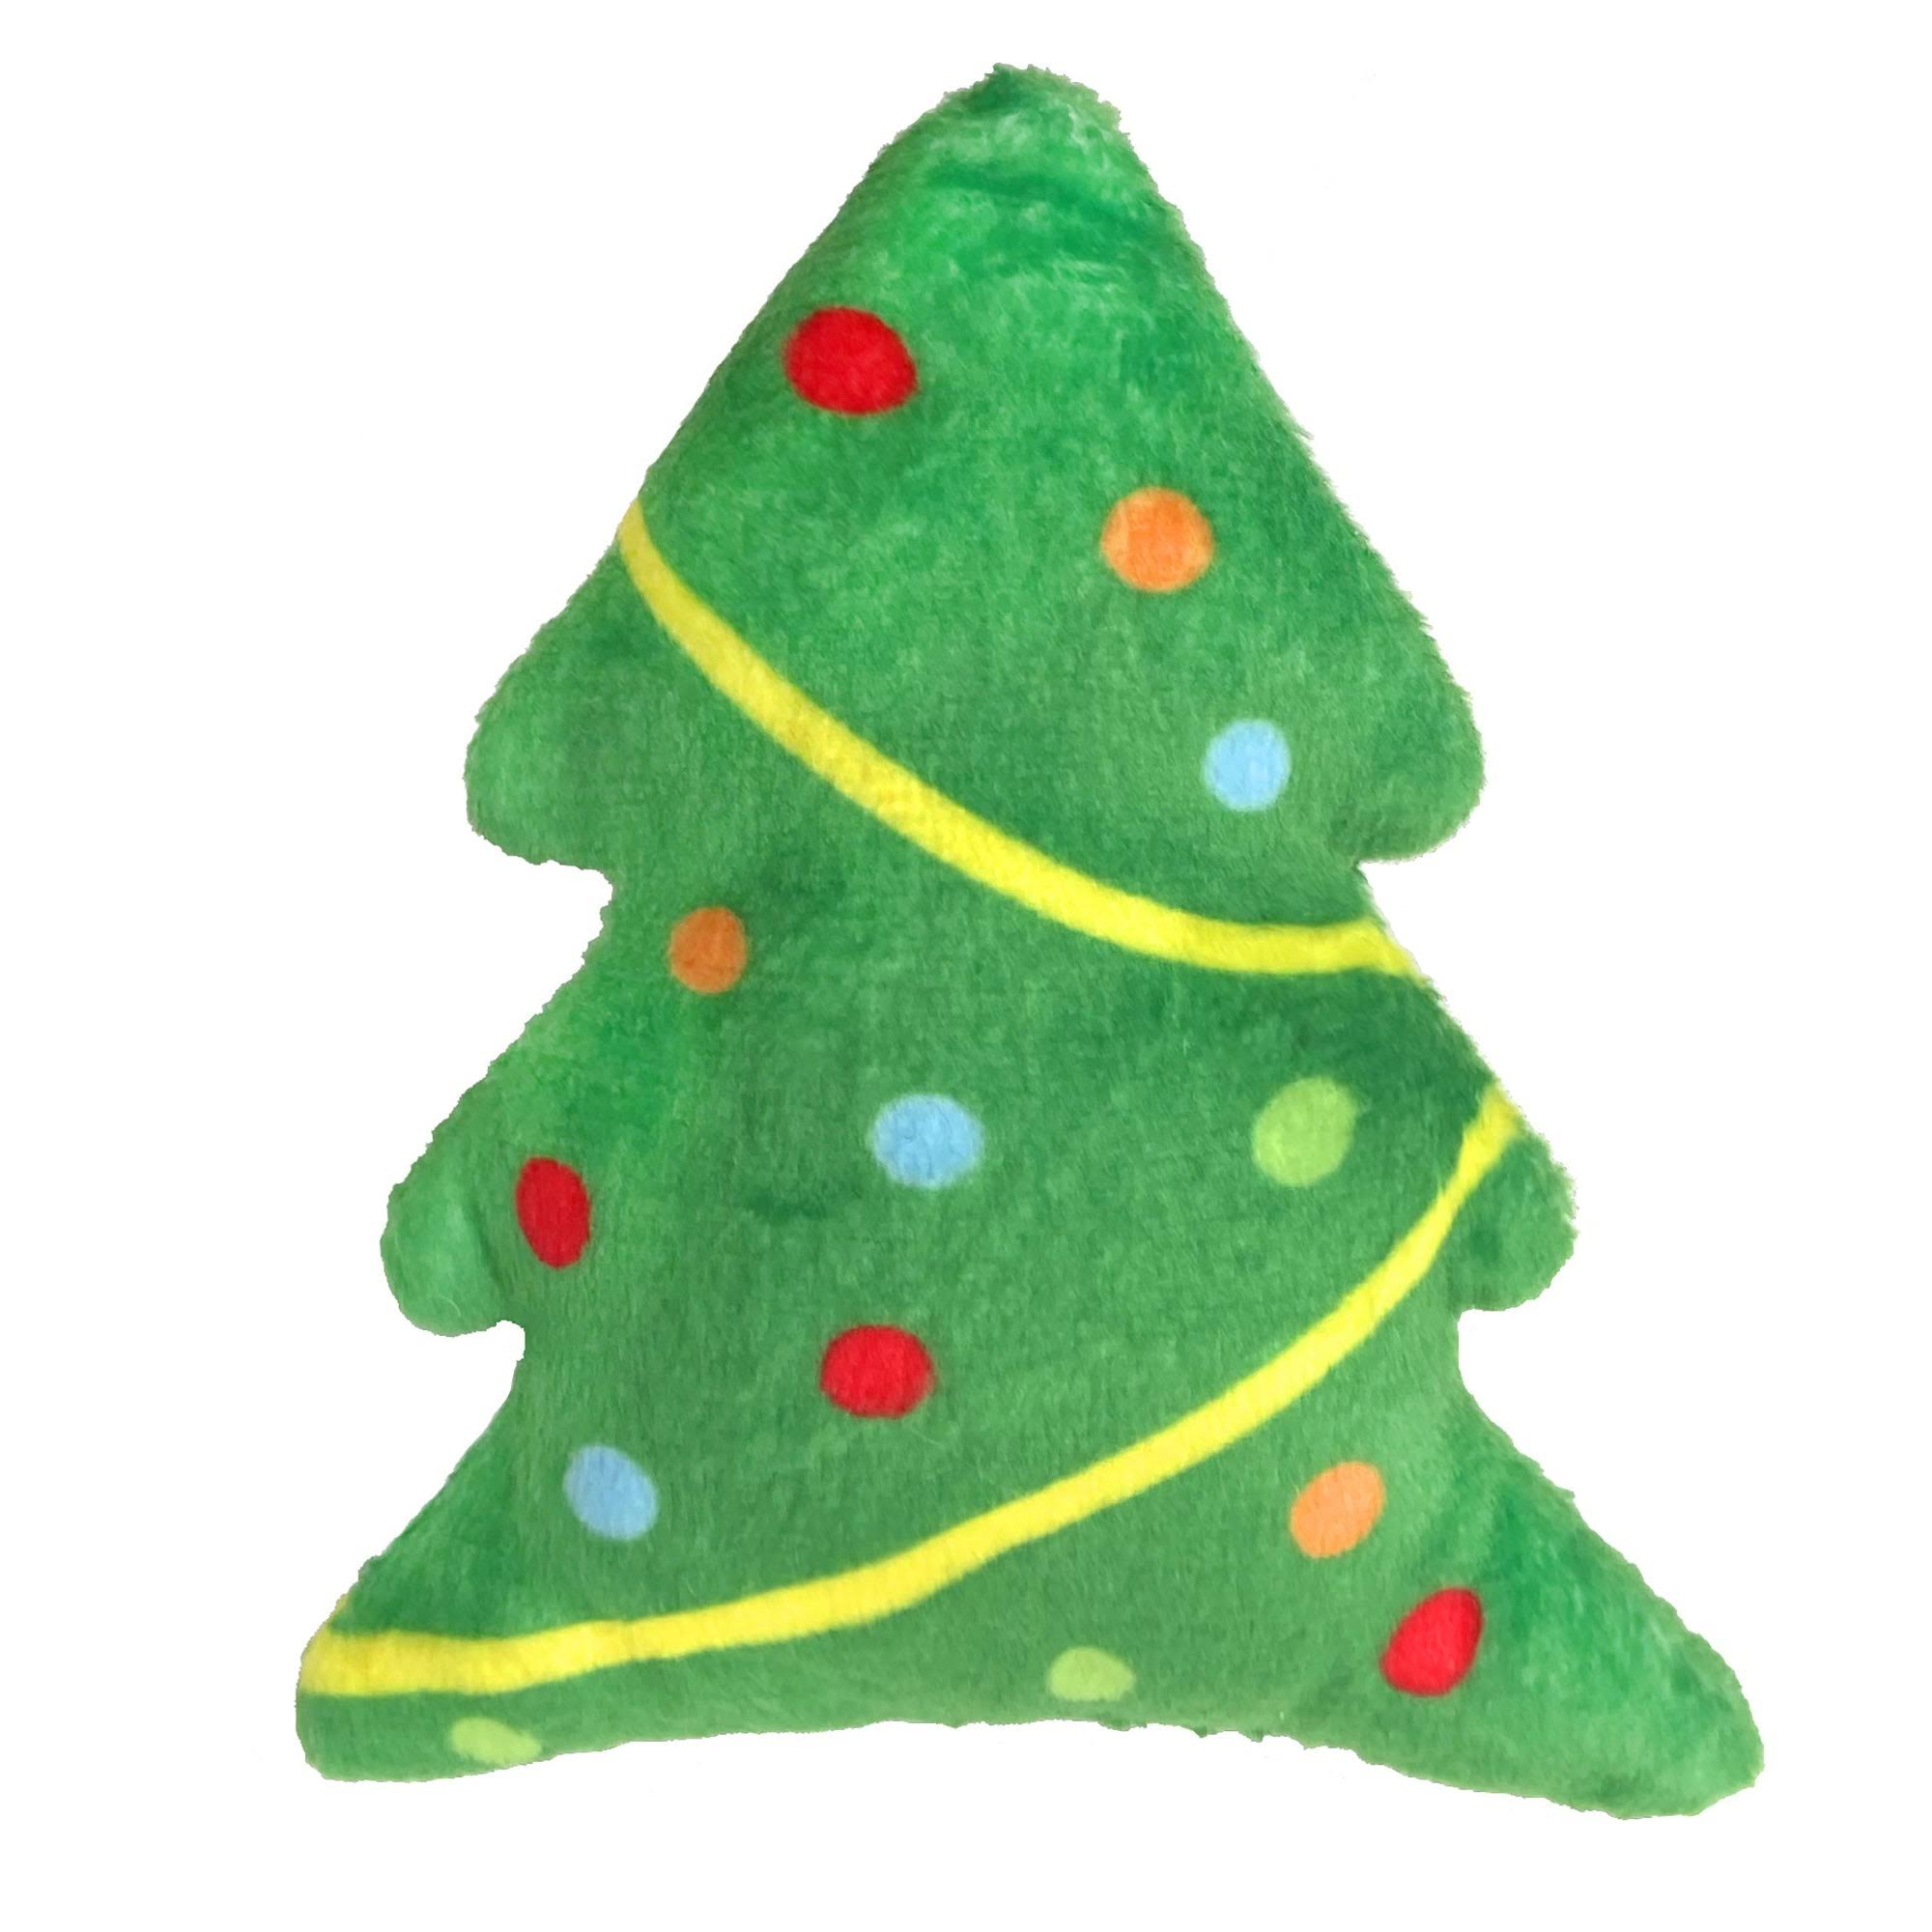 Kittybelles Up a Tree Christmas Plush Toy